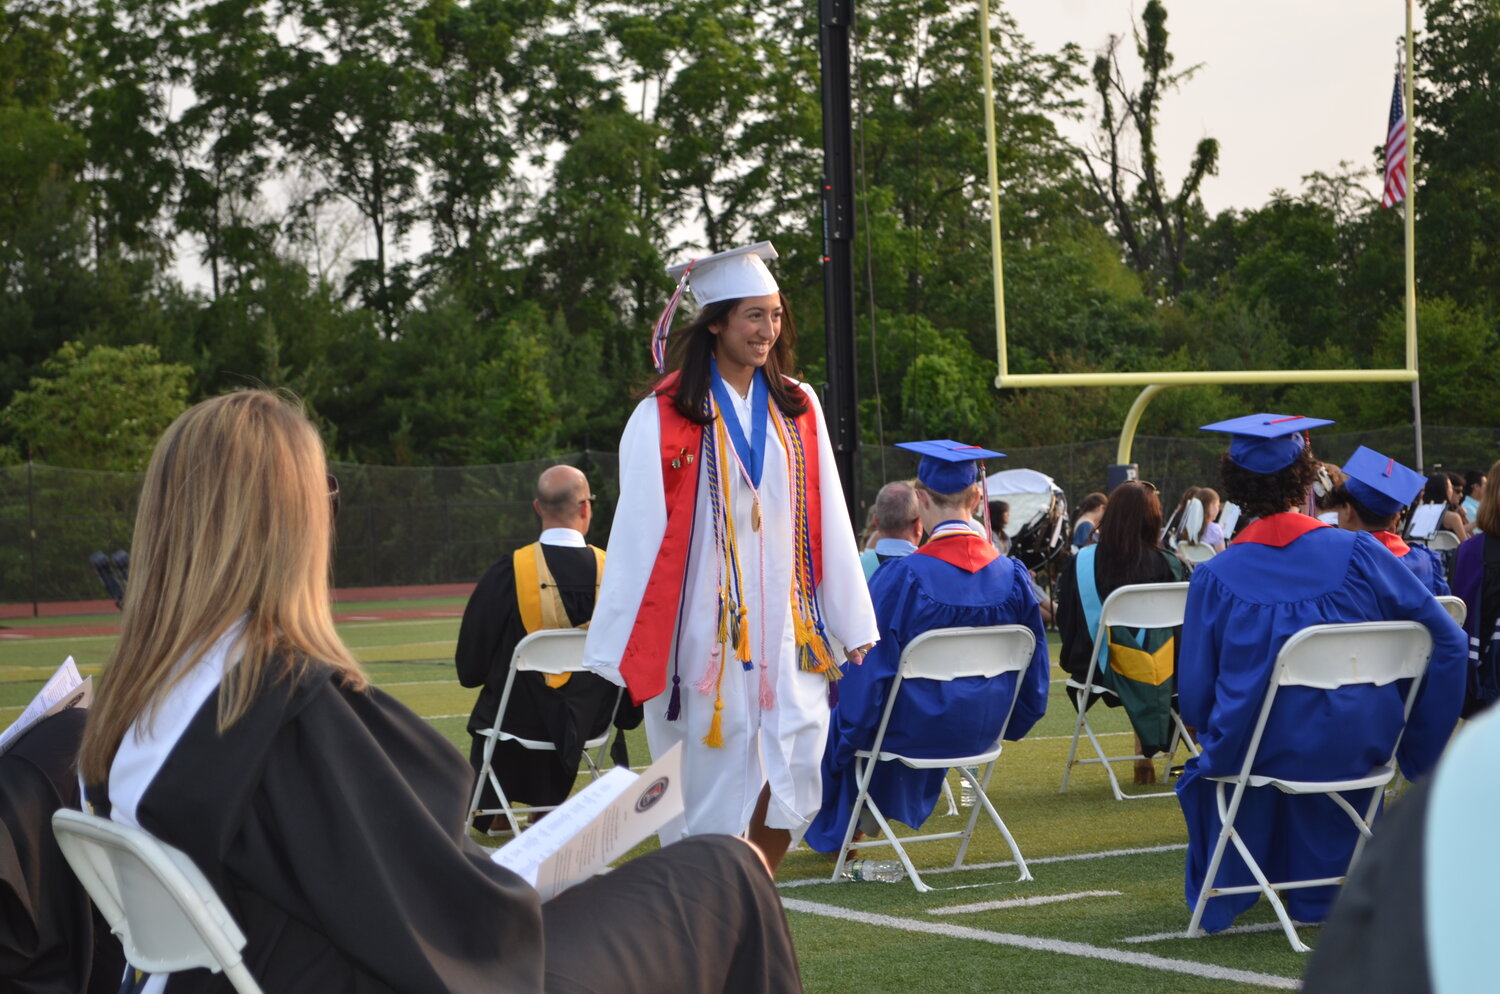 Central Bucks High School East graduate Tooba Khan returns to her seat after a performance during the school’s commencement ceremony.